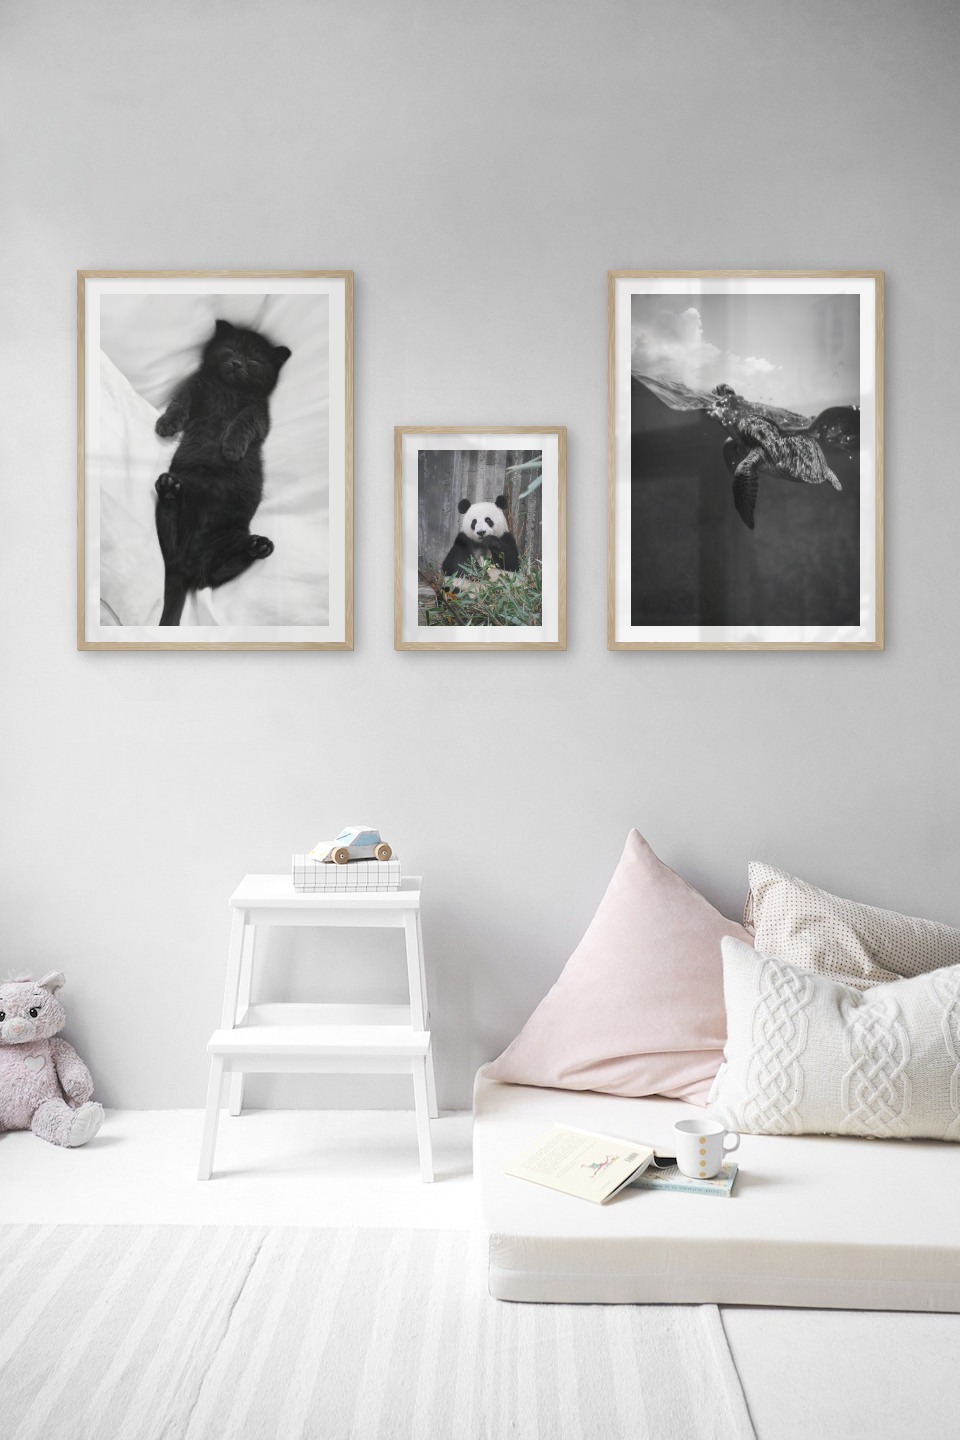 Gallery wall with picture frames in wood in sizes 50x70 and 30x40 with prints "Cat in bed", "Panda" and "Turtle"